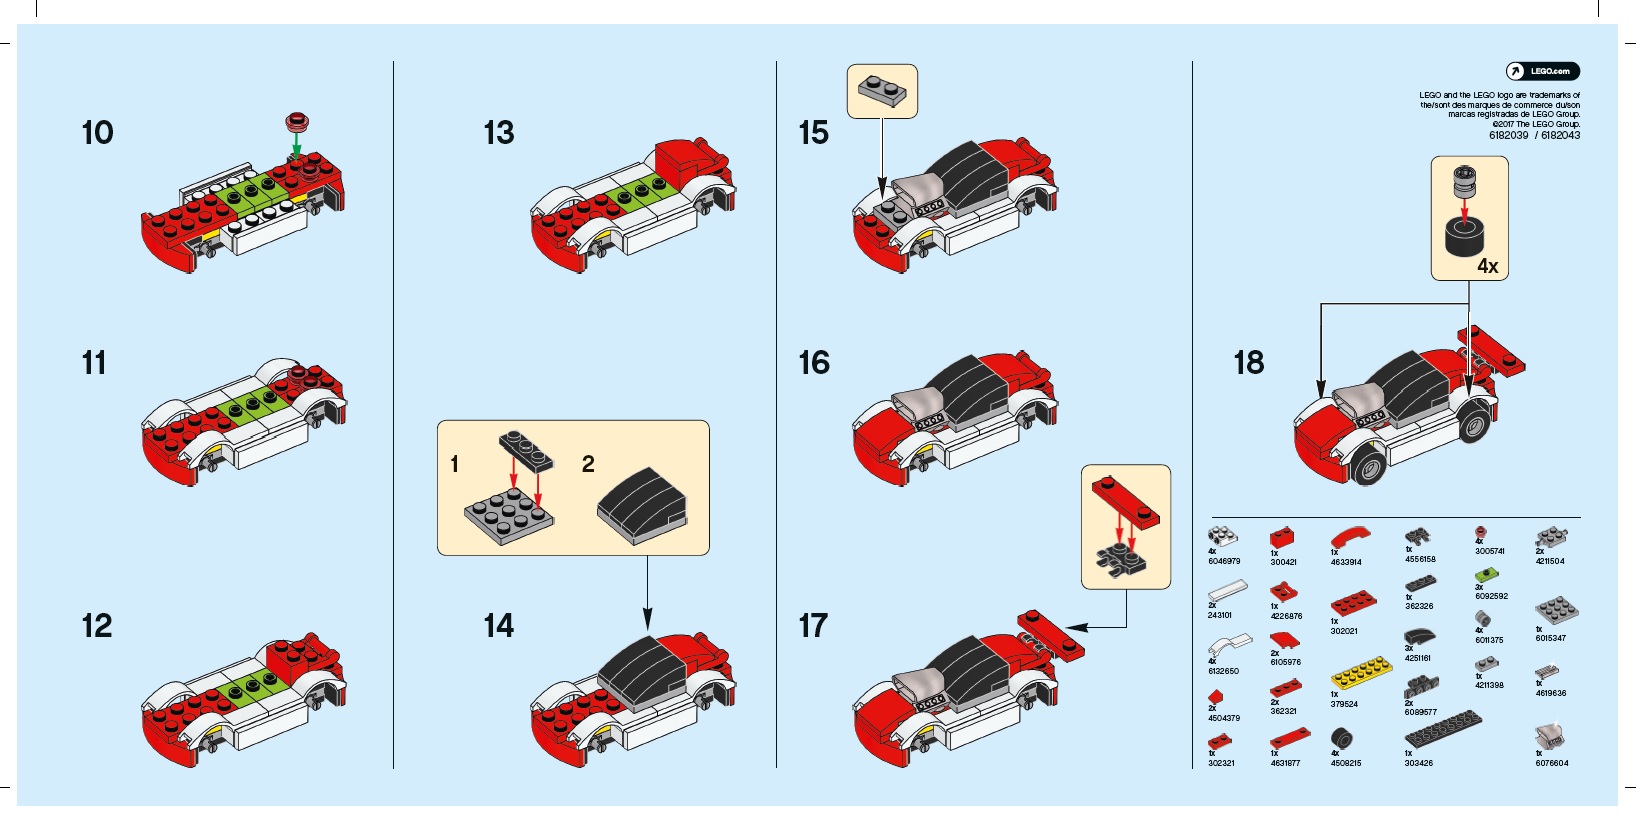 May 2017 LEGO Store Monthly Mini Model Build Race Car Instructions ...